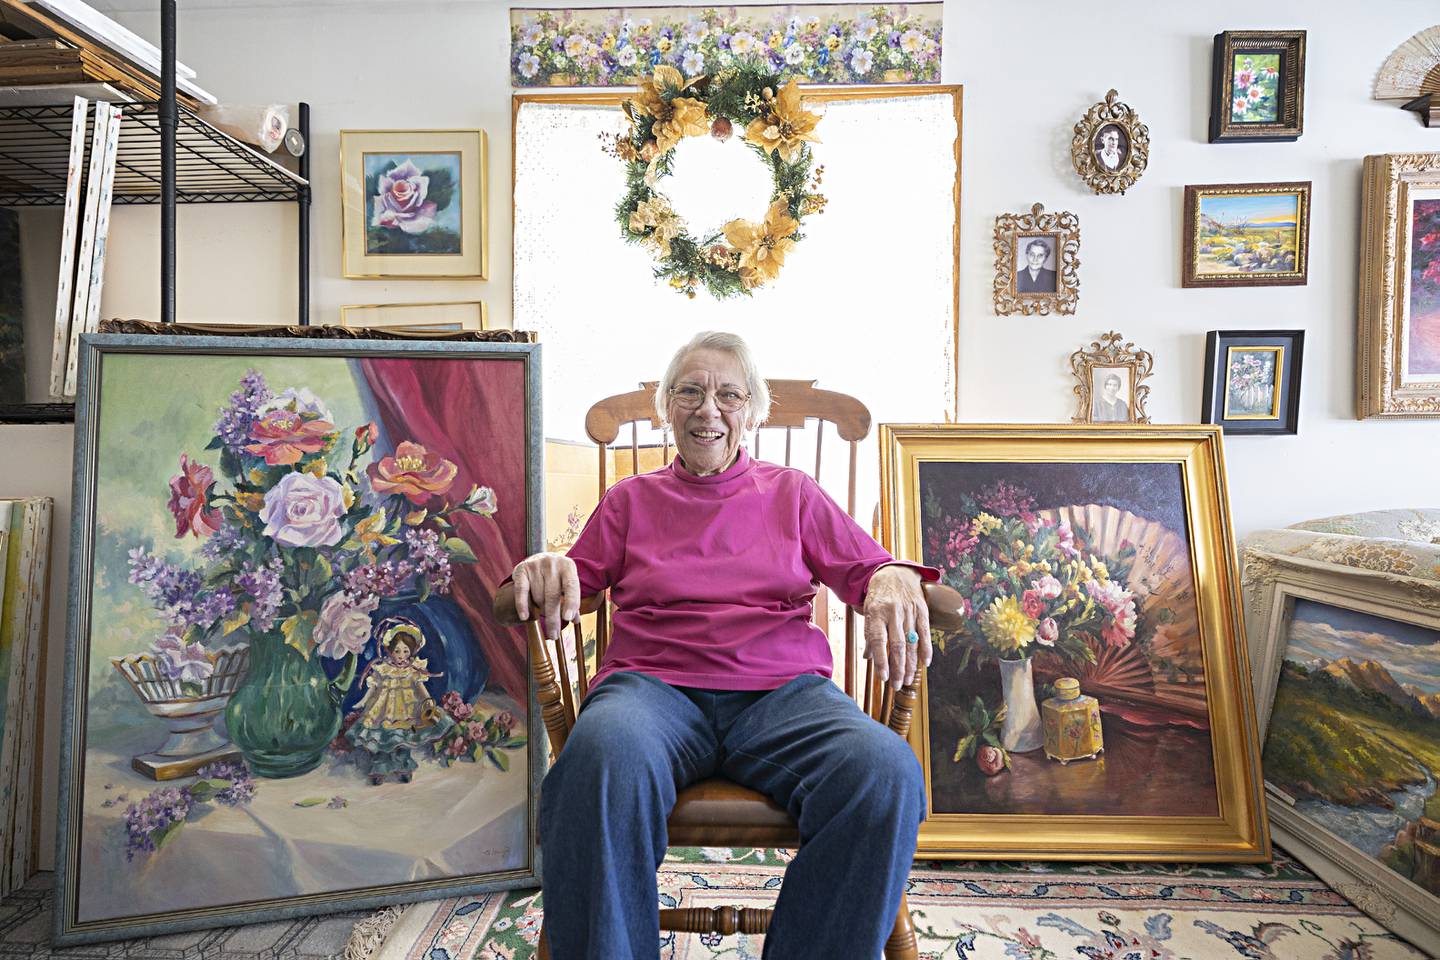 Beverly Garcia sits in her Dixon home studio Tuesday, Nov. 28, 2023. Artists Garcia and Jan Harvey will be opening their homes to an art show Dec. 1 and 2 to showcase their work ahead of the holiday season.